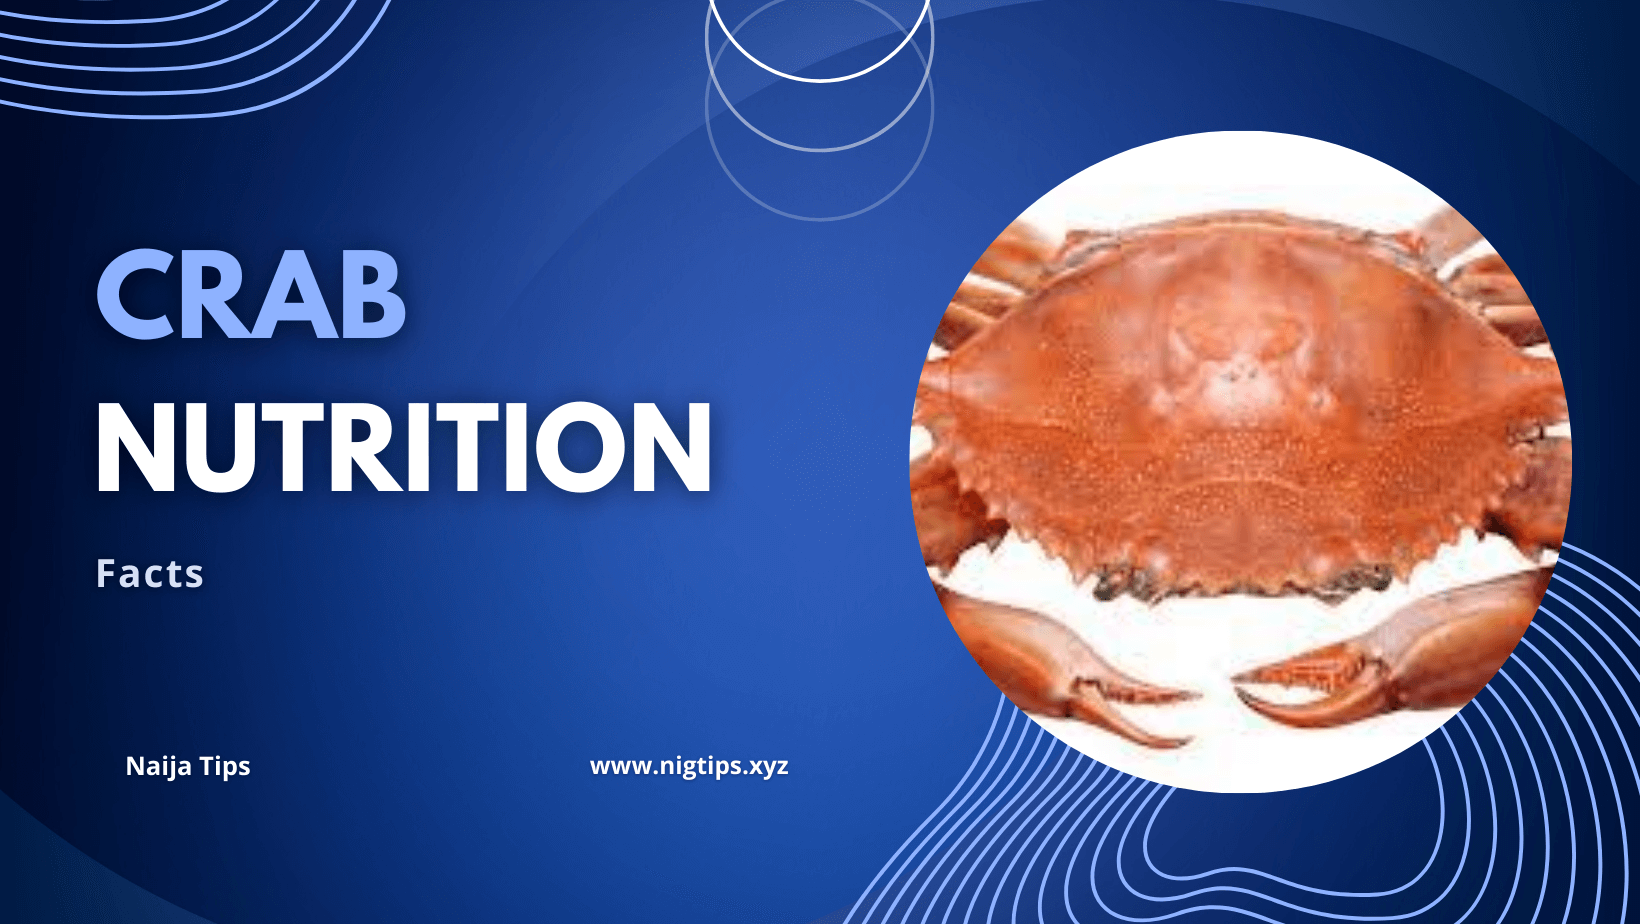 Crab Nutrition Facts